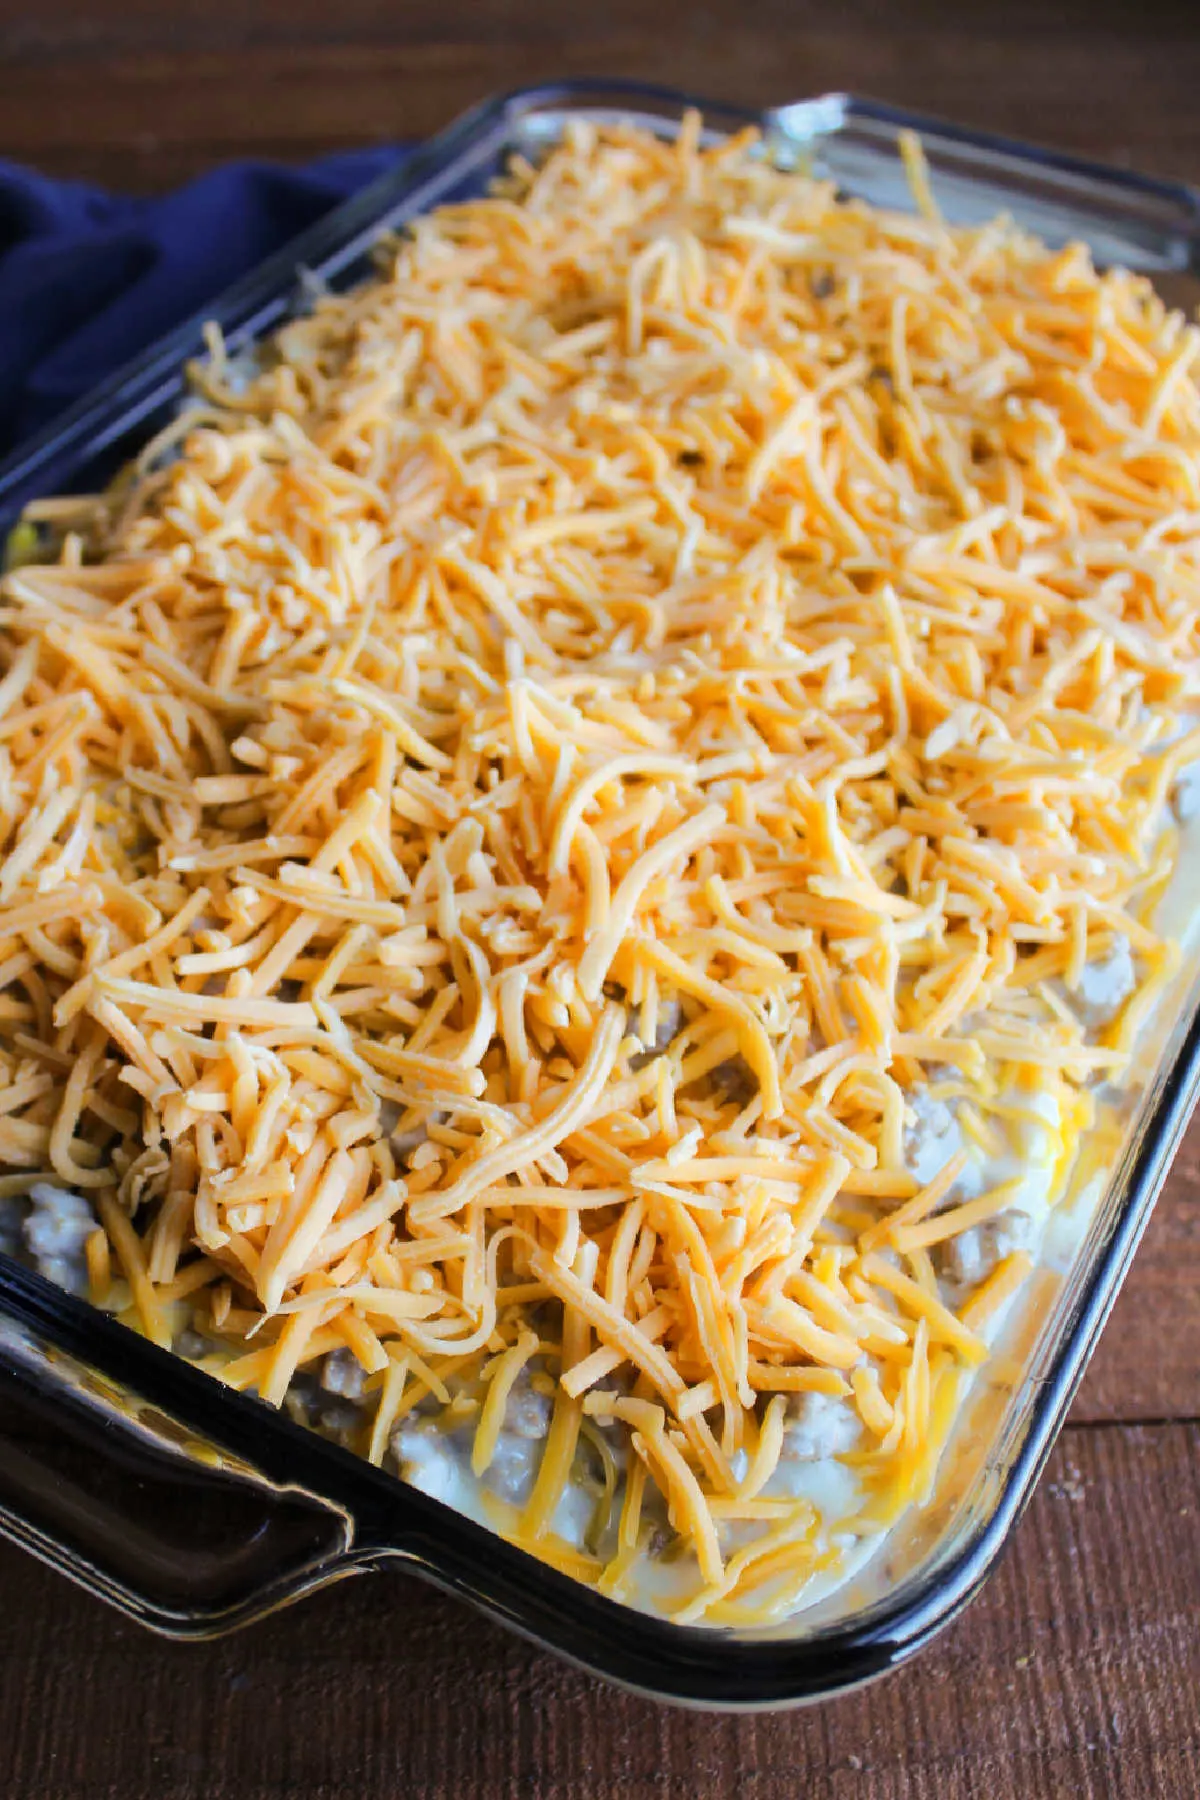 Shredded cheddar cheese layered over sausage gravy in casserole dish, ready to bake.